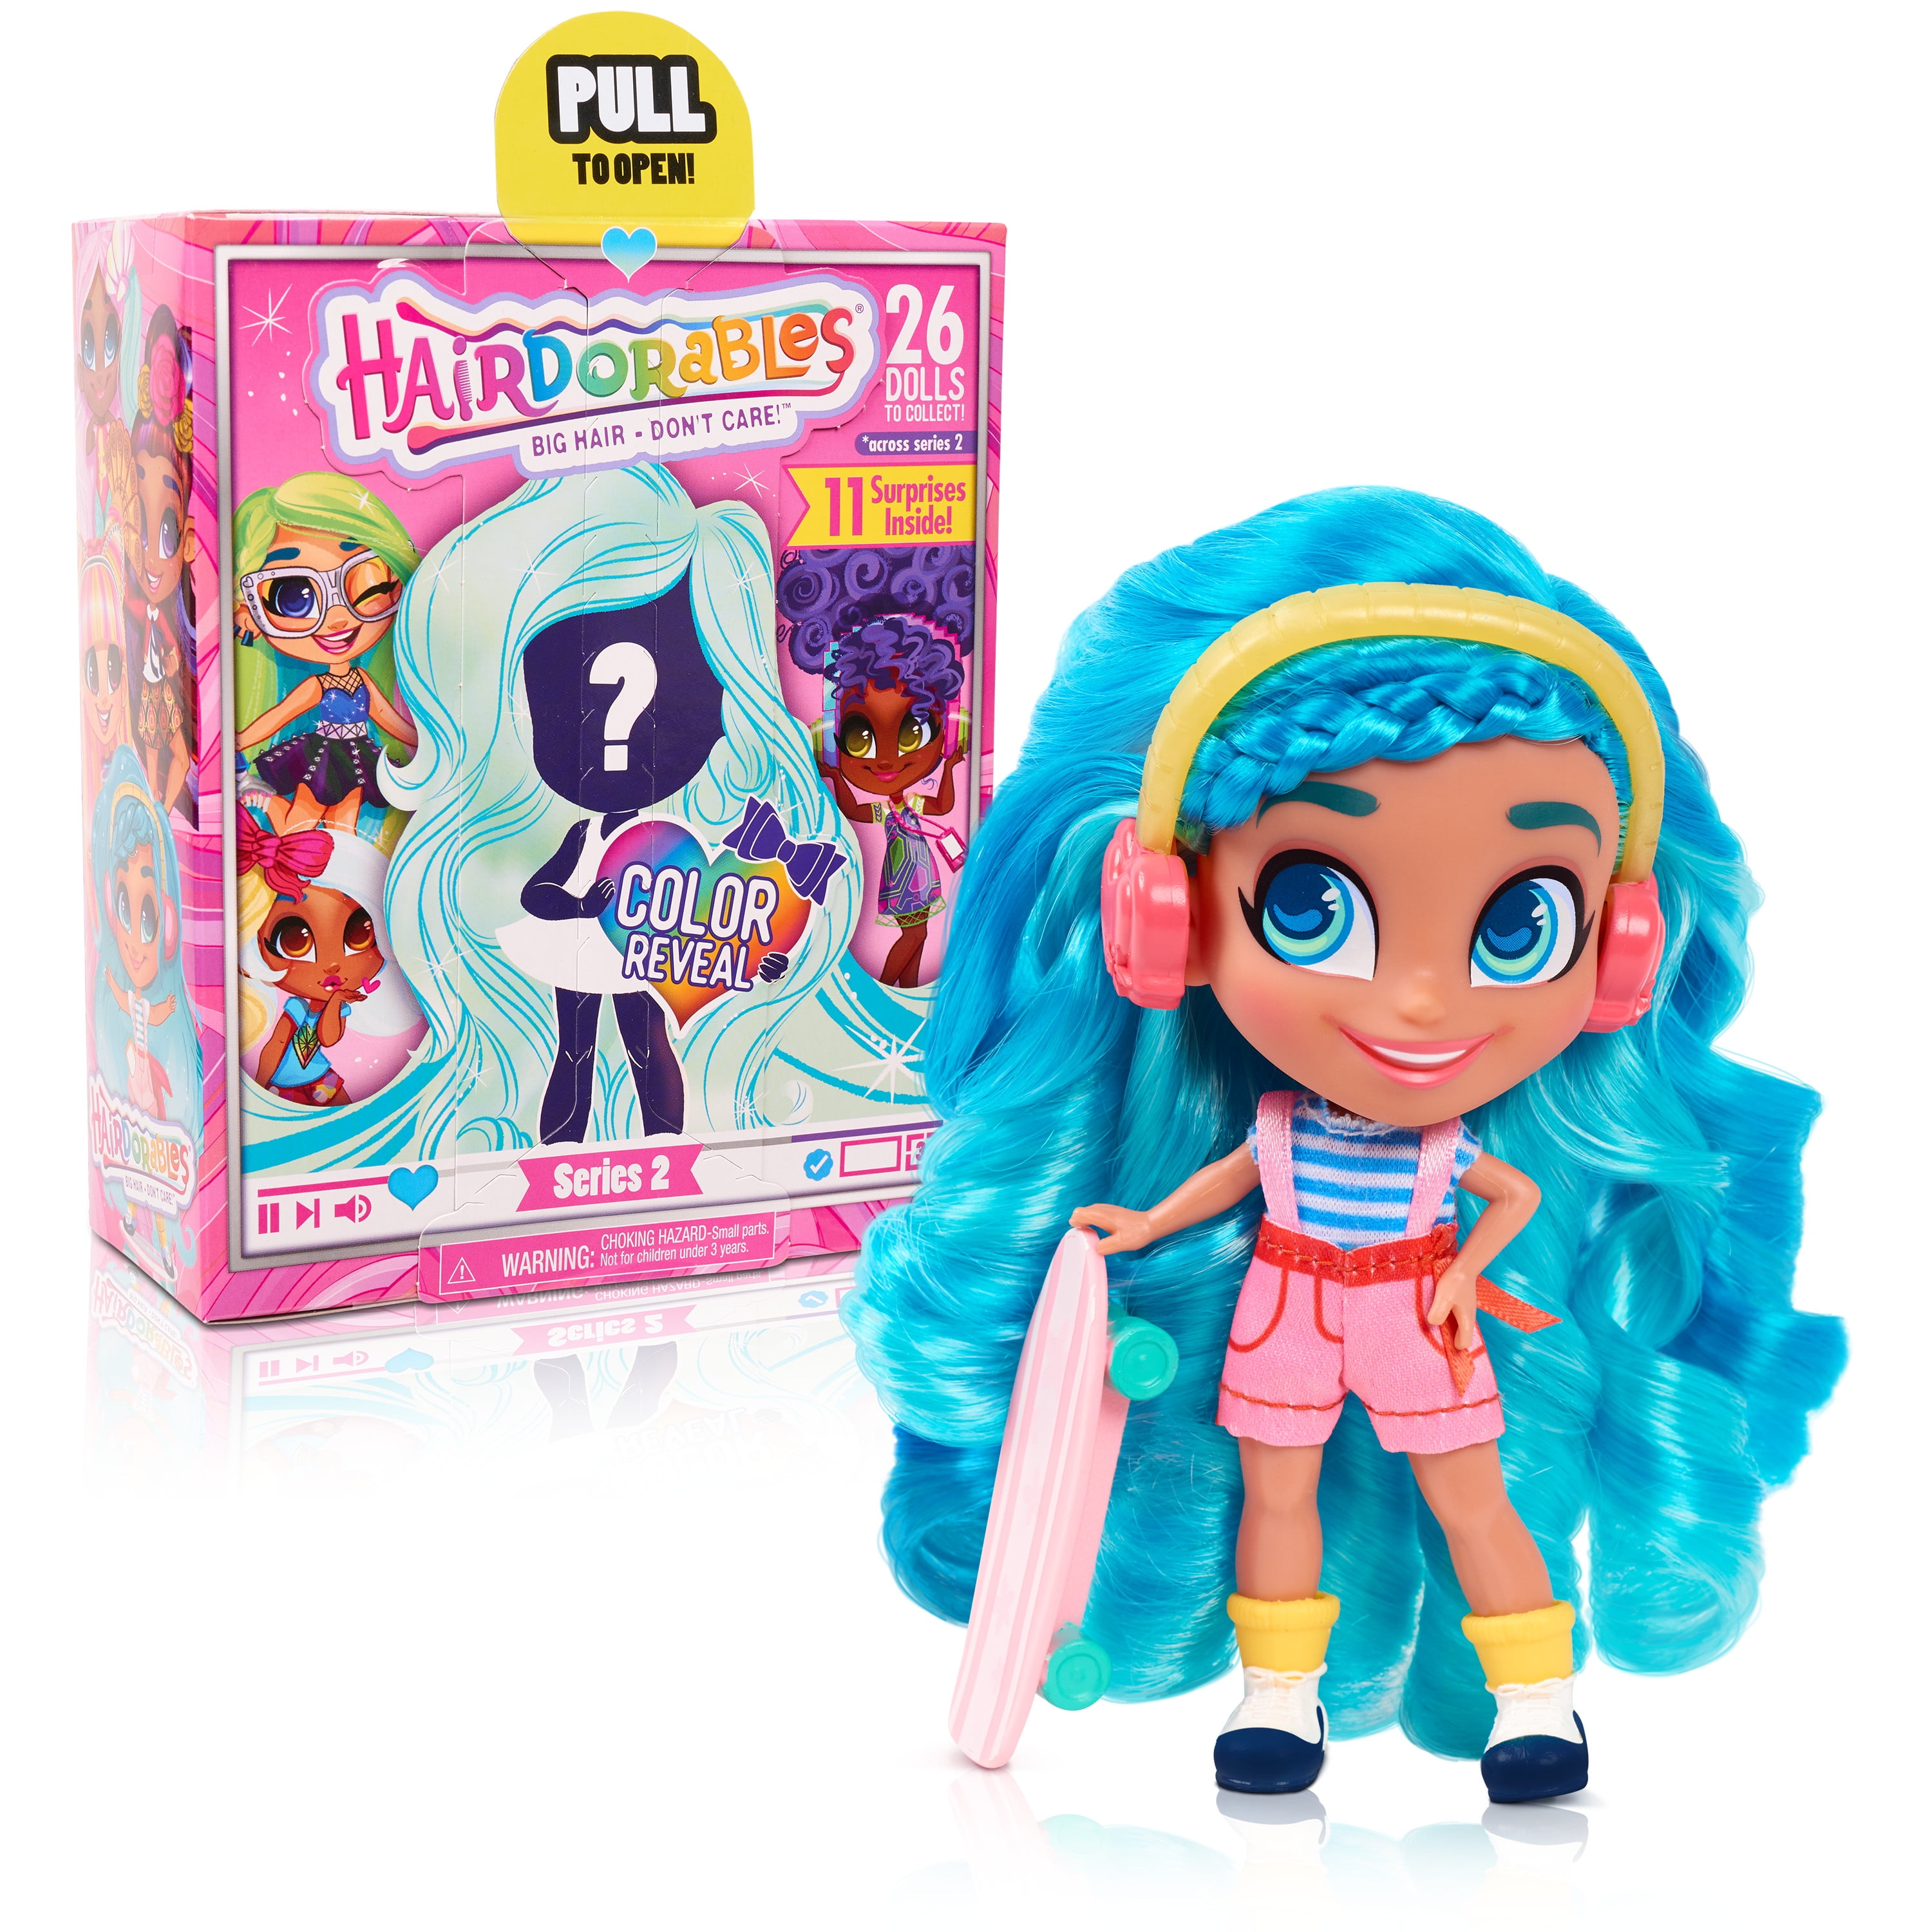 Hairdorables Series 4 Scented Blind Surprise Mystery Doll Big Hair Blue Case for sale online